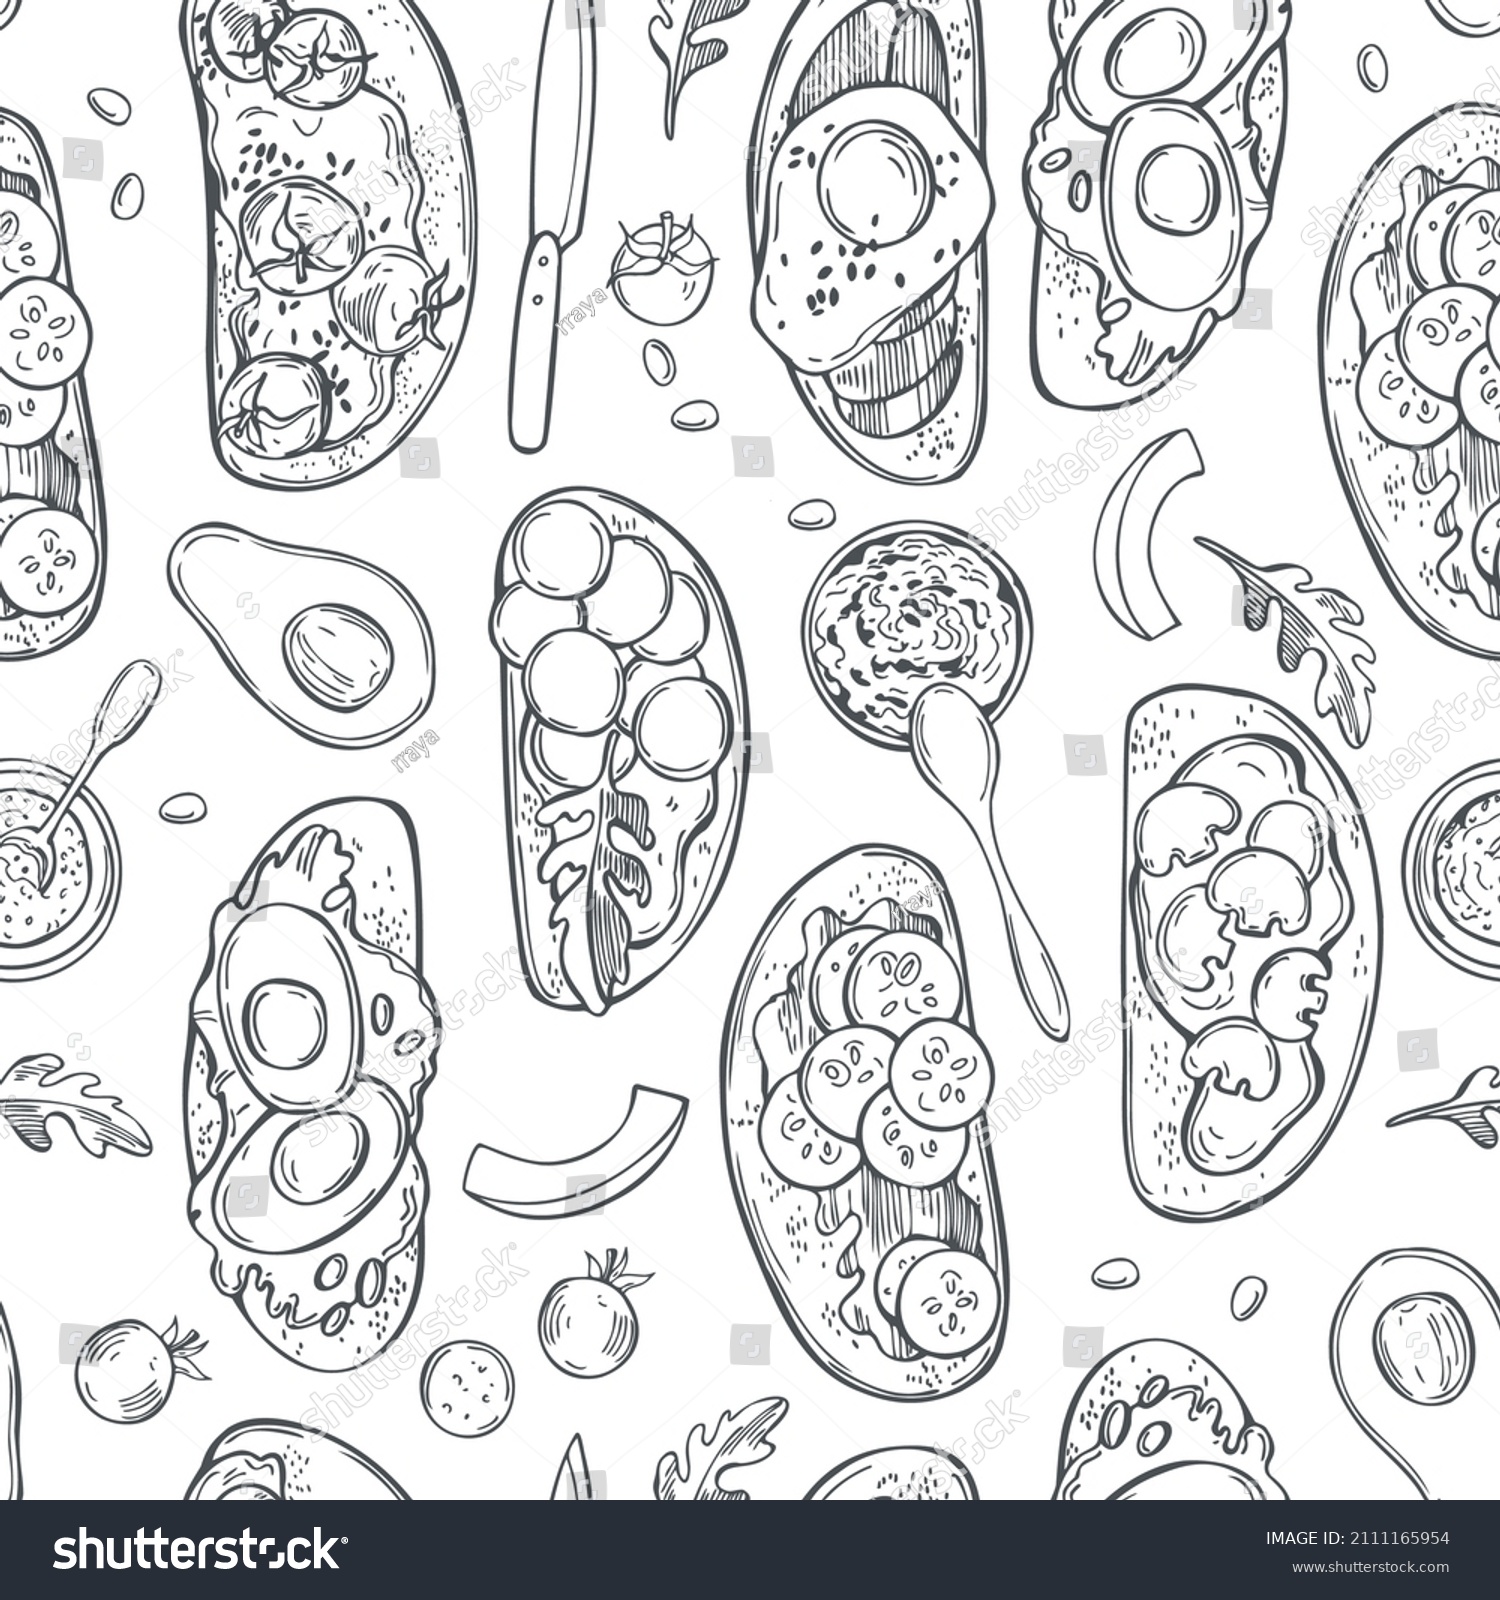 SVG of Hand-drawn toasts on white background.  Vector seamless pattern.  svg